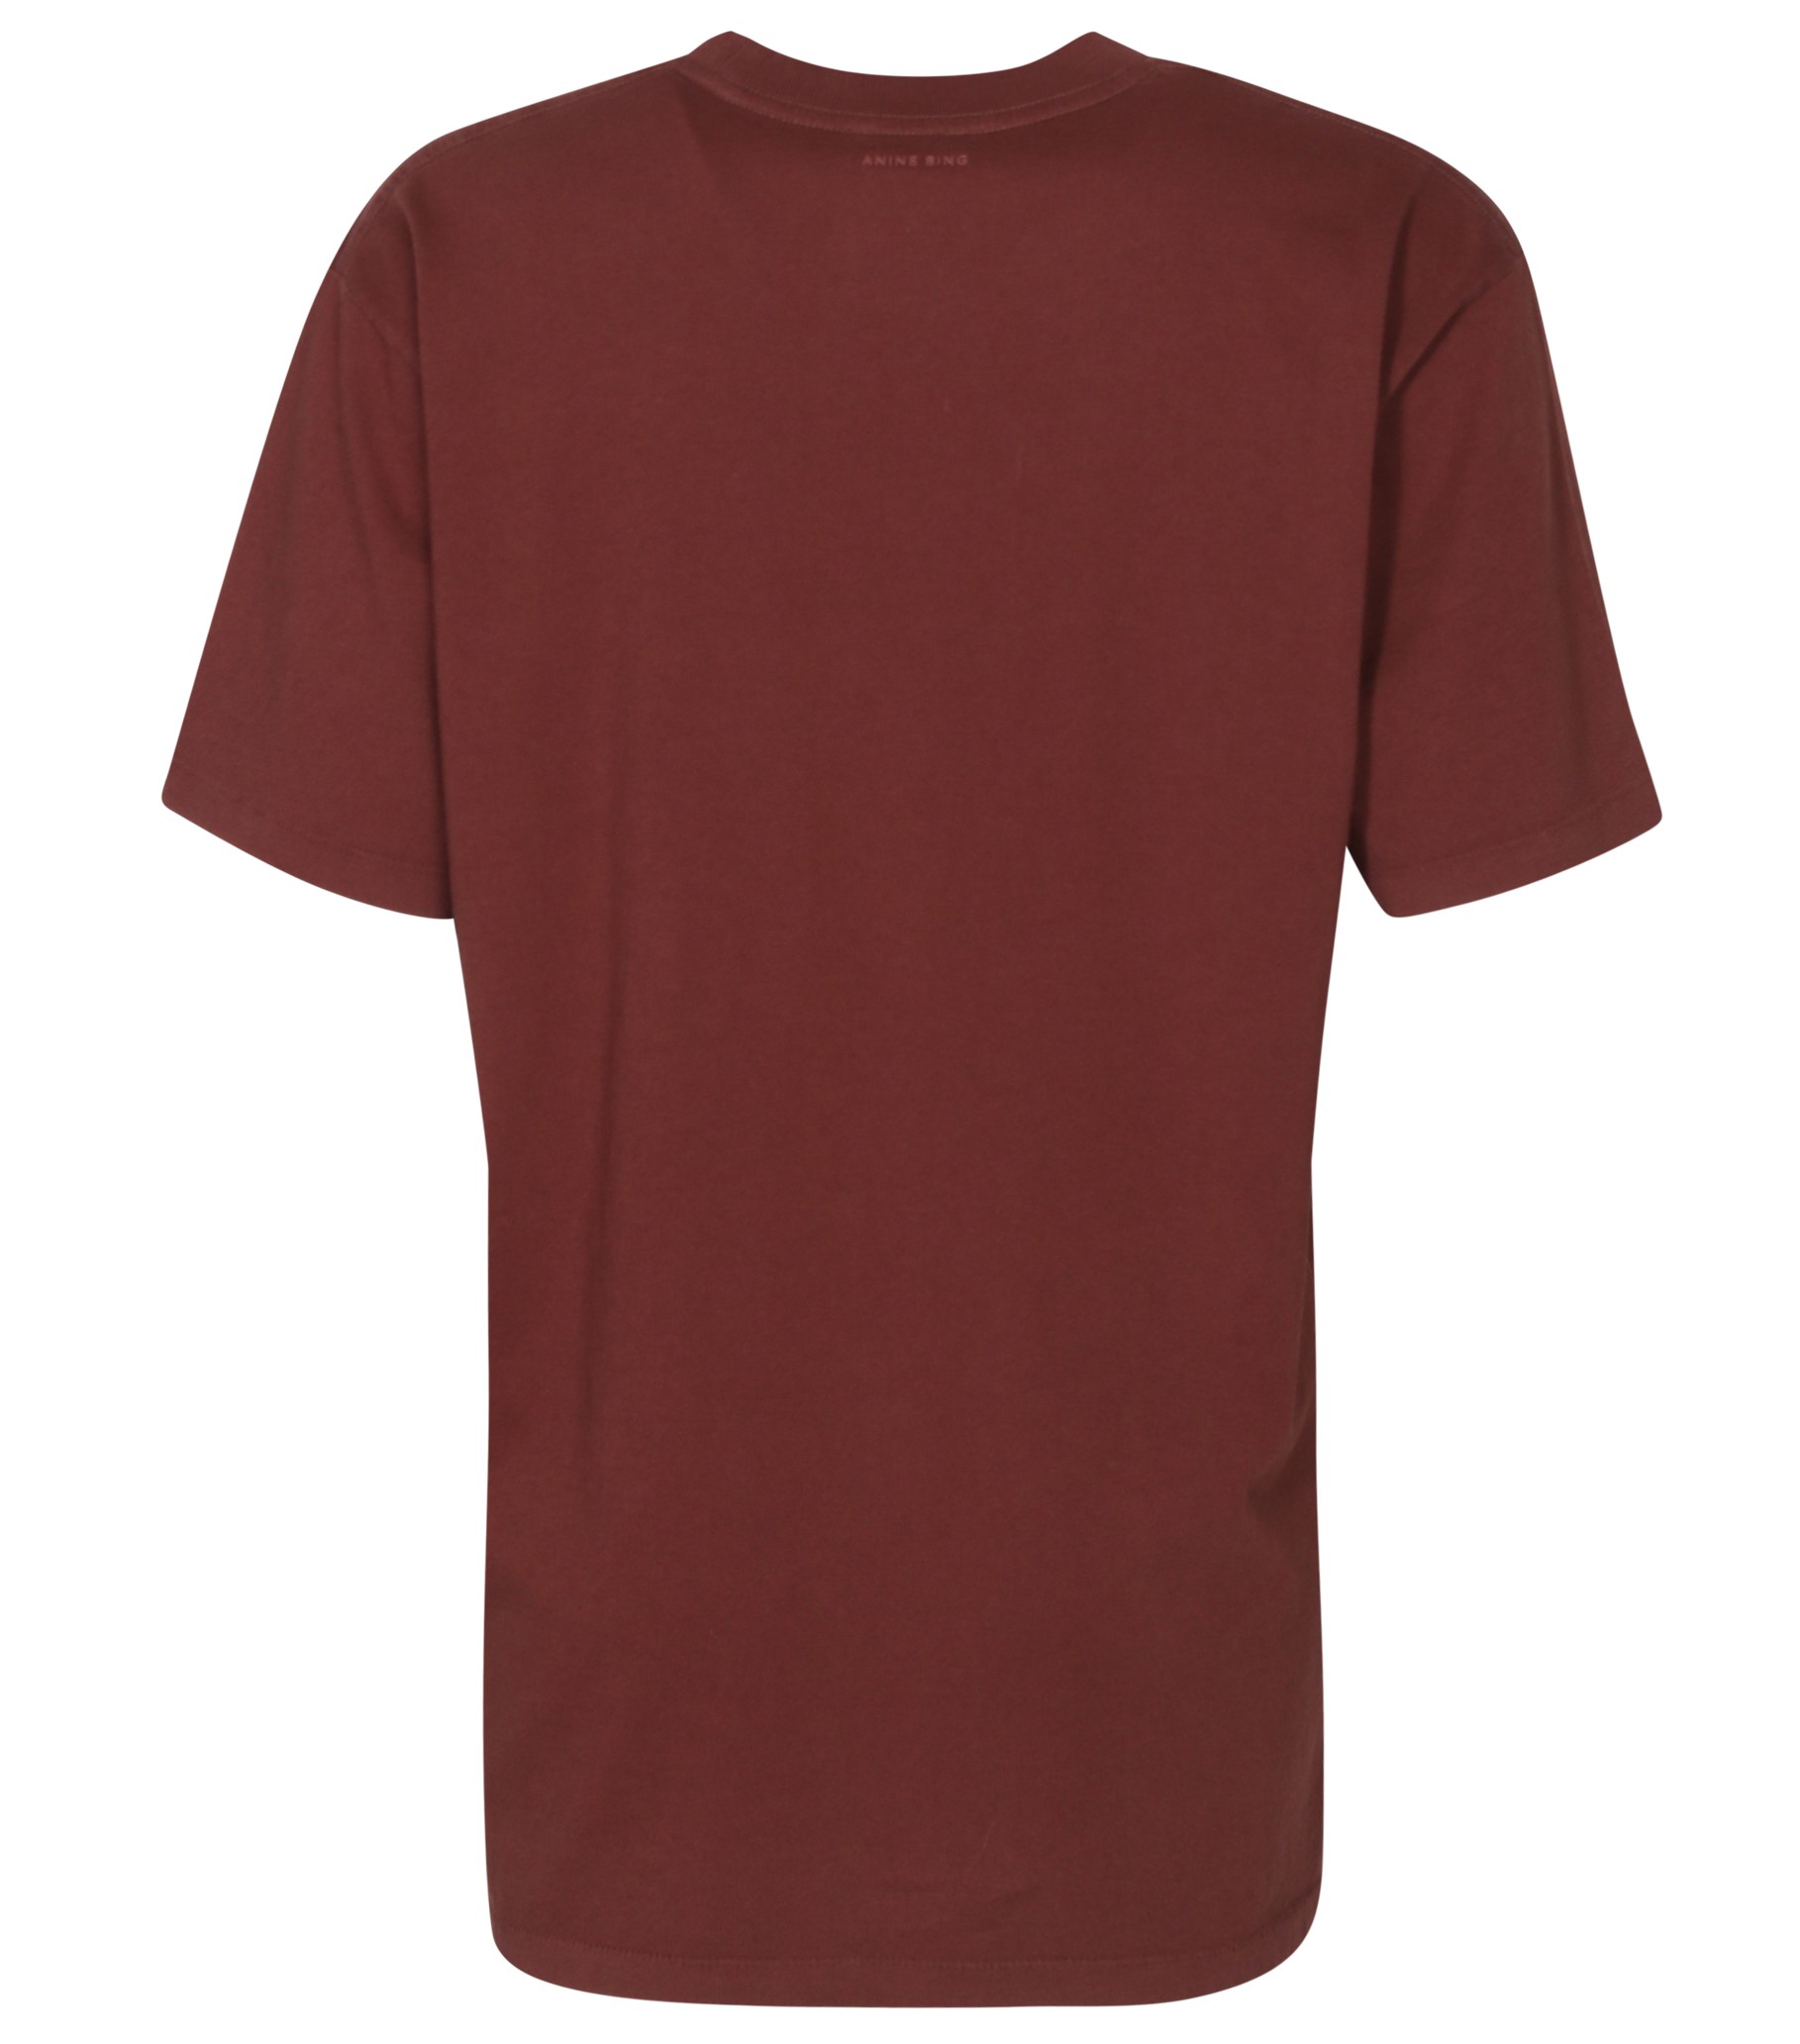 ANINE BING Walker Tee Retro Tiger in Washed Faded Cherry M